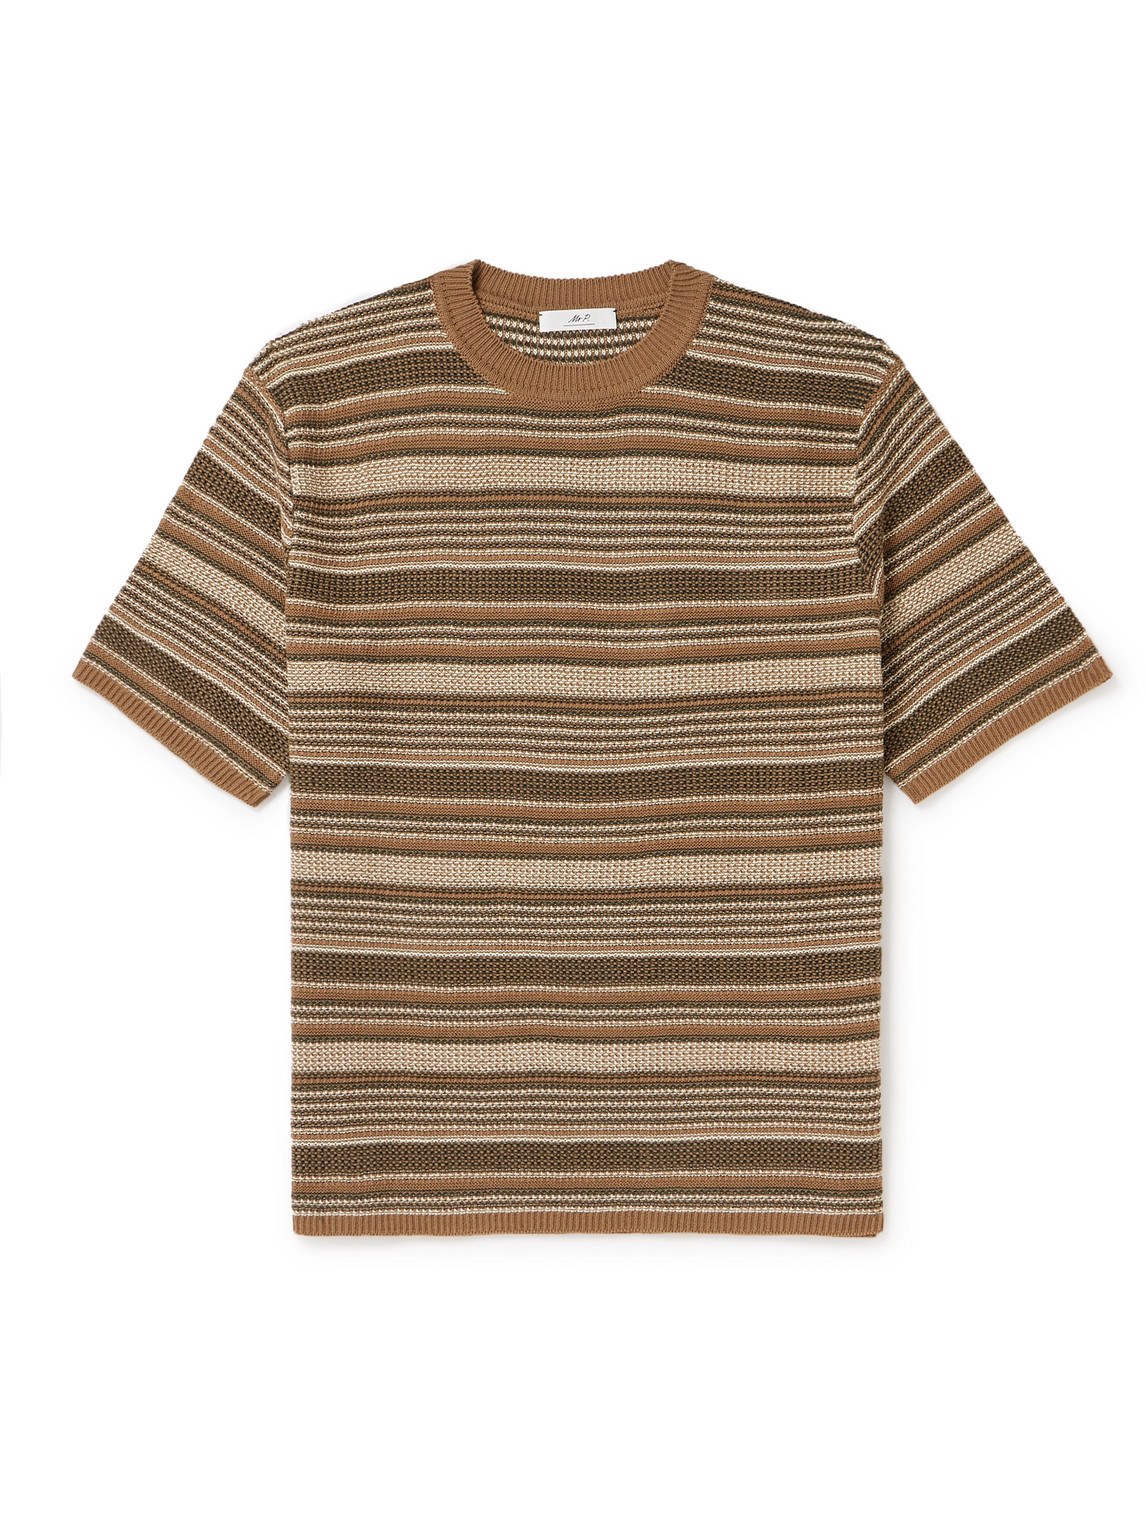 Mr P Striped Crochet-knit Cotton T-shirt In Brown